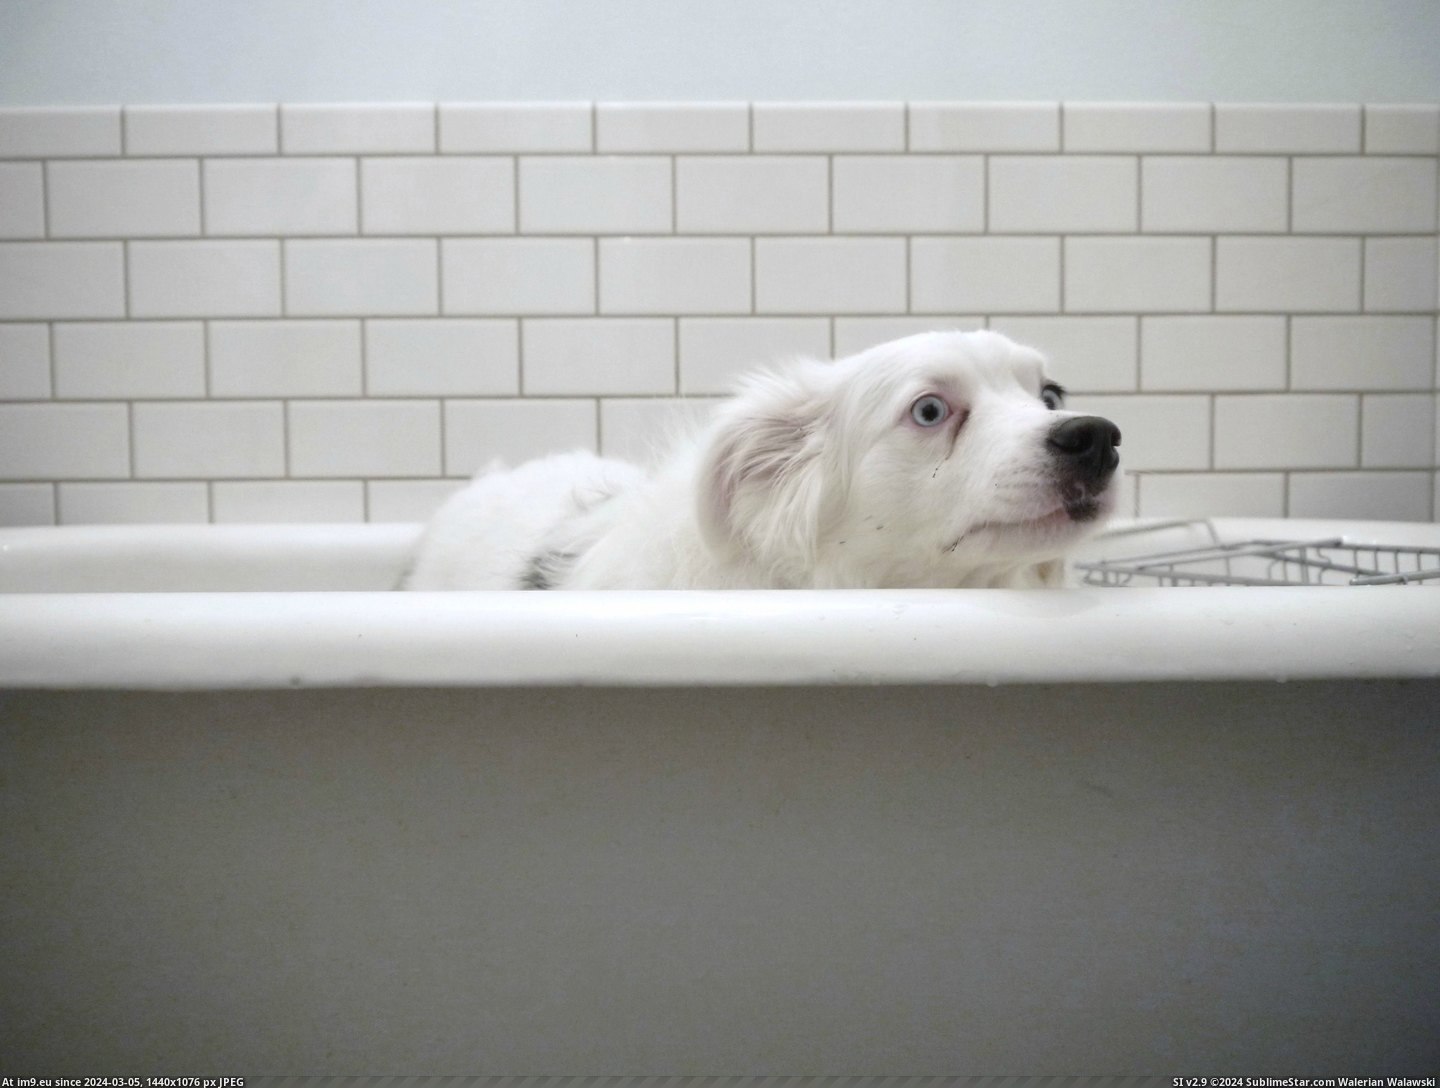 #Face #Bath #Dogs #But [Aww] My dogs best 'Anything but a bath!' face. Pic. (Изображение из альбом My r/AWW favs))